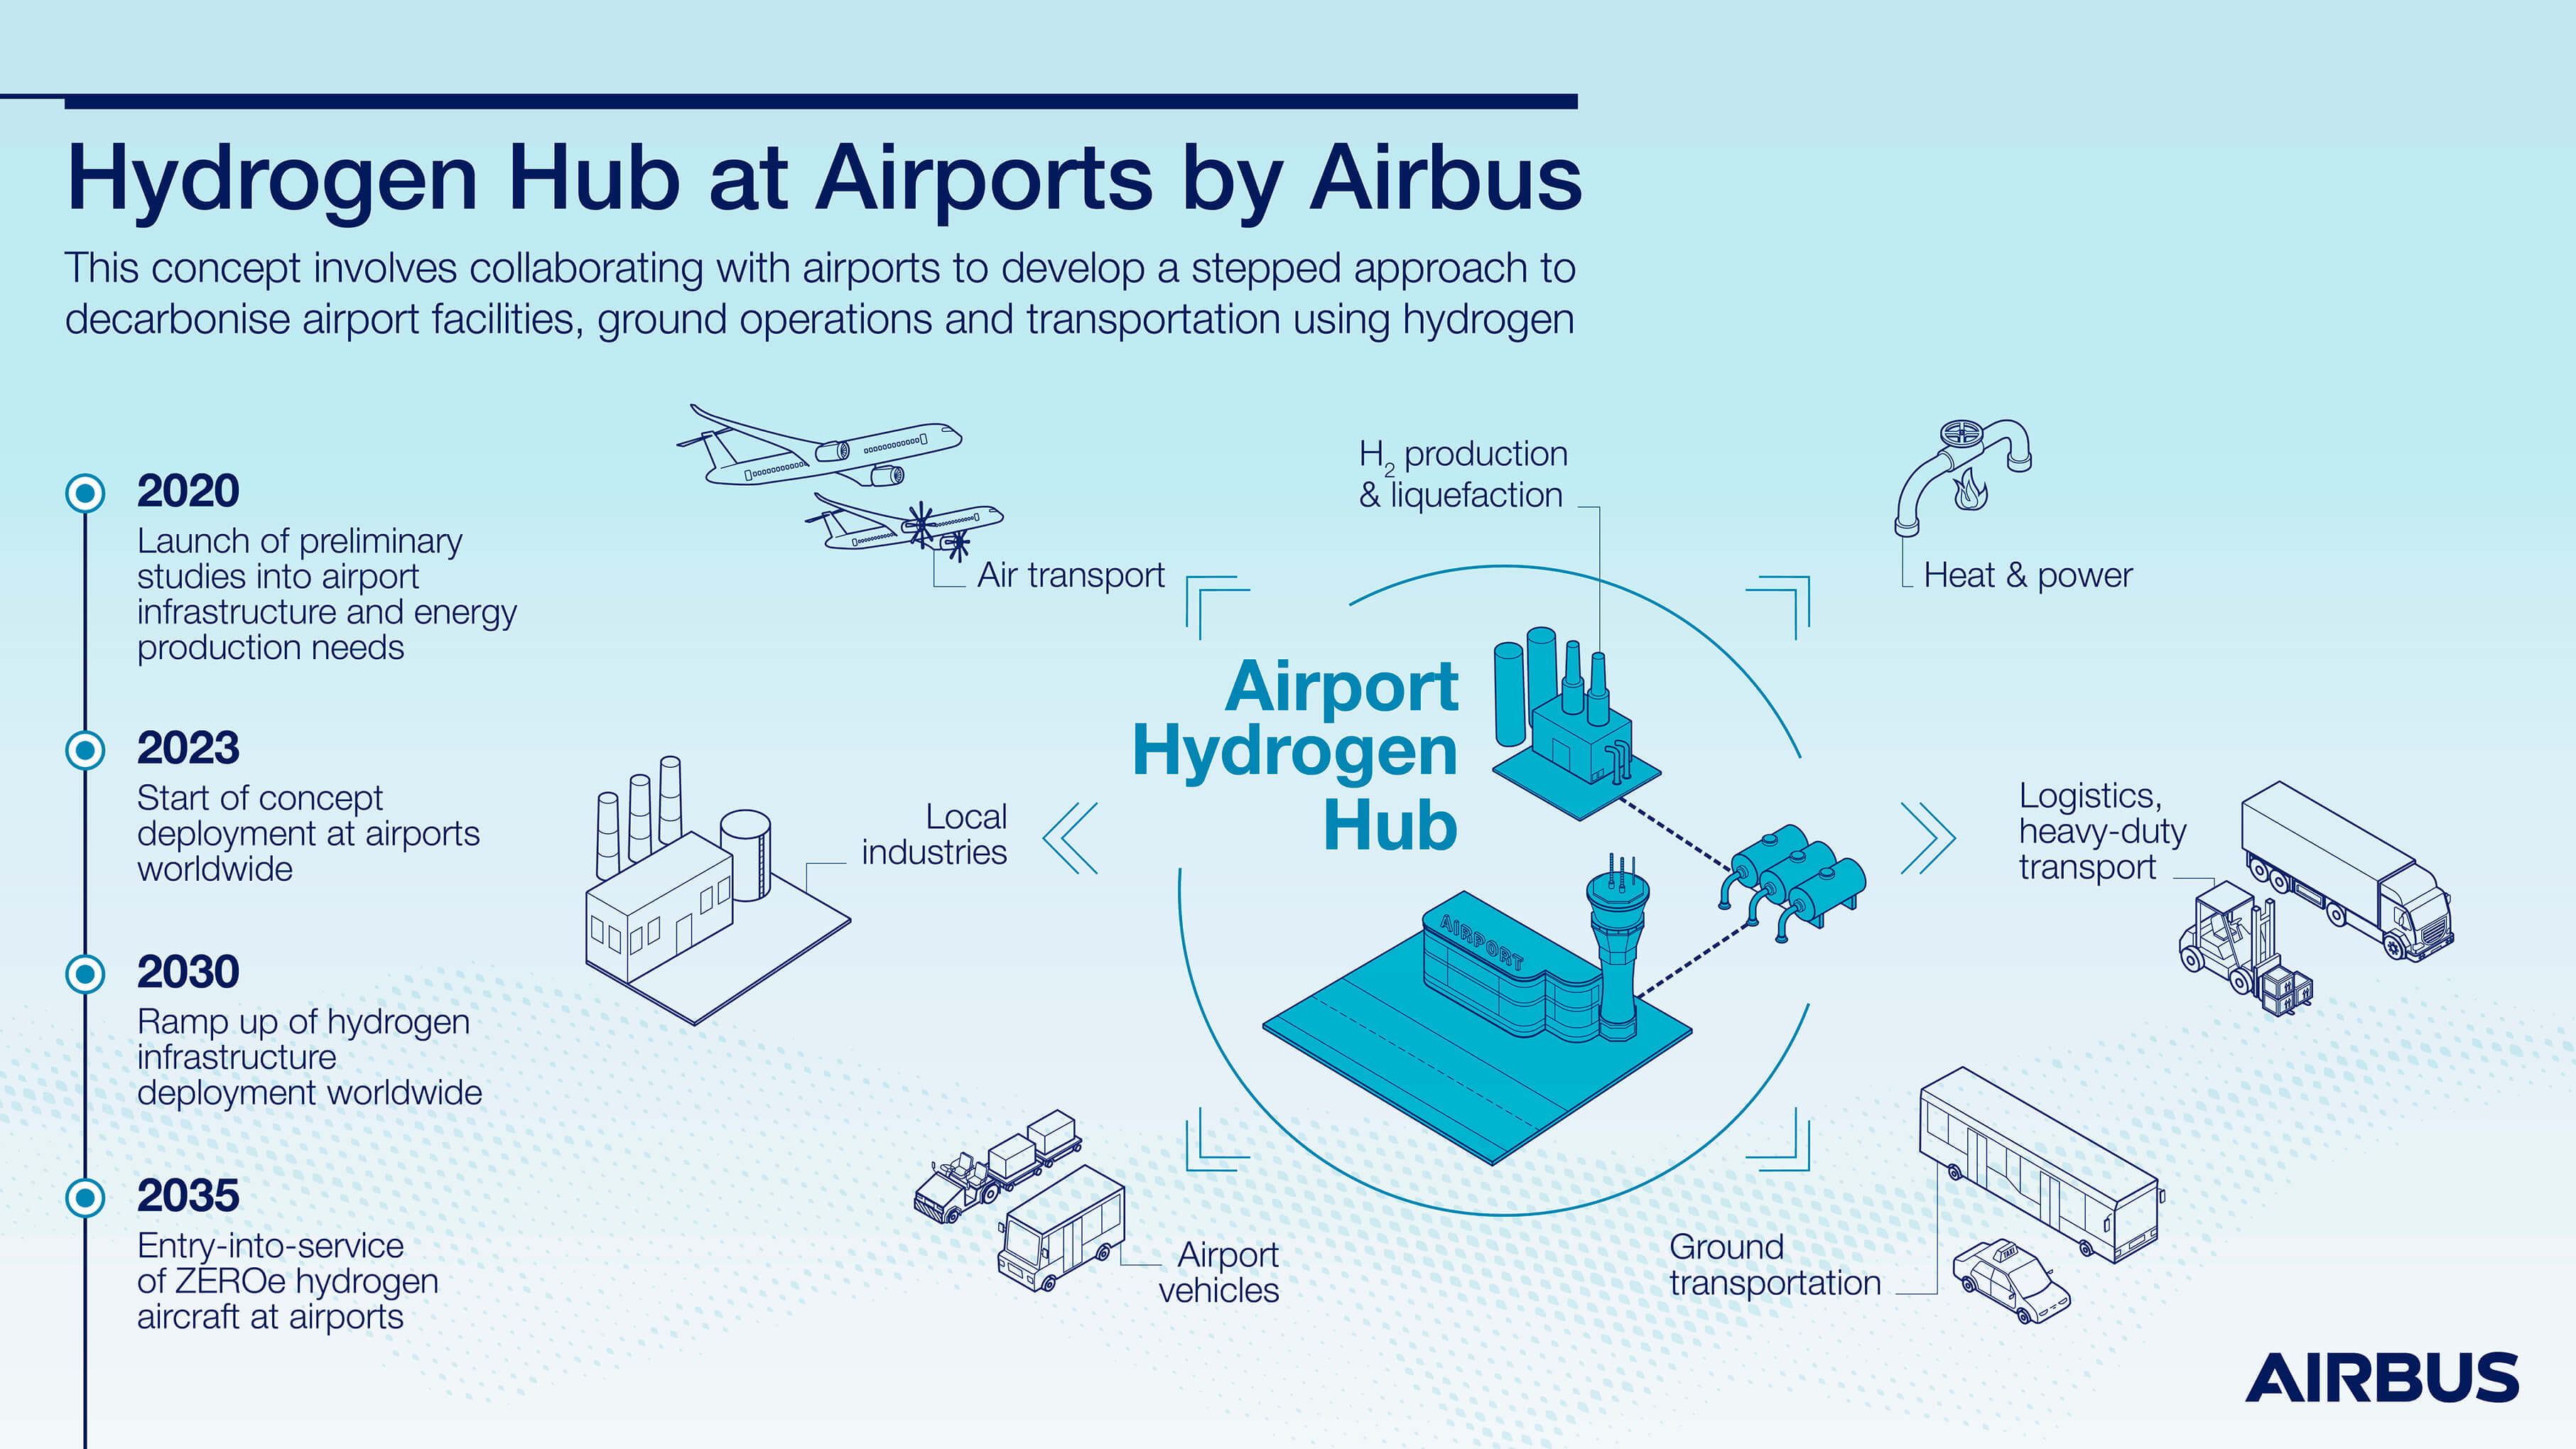 Hydrogen Hun at Airports by Airbus